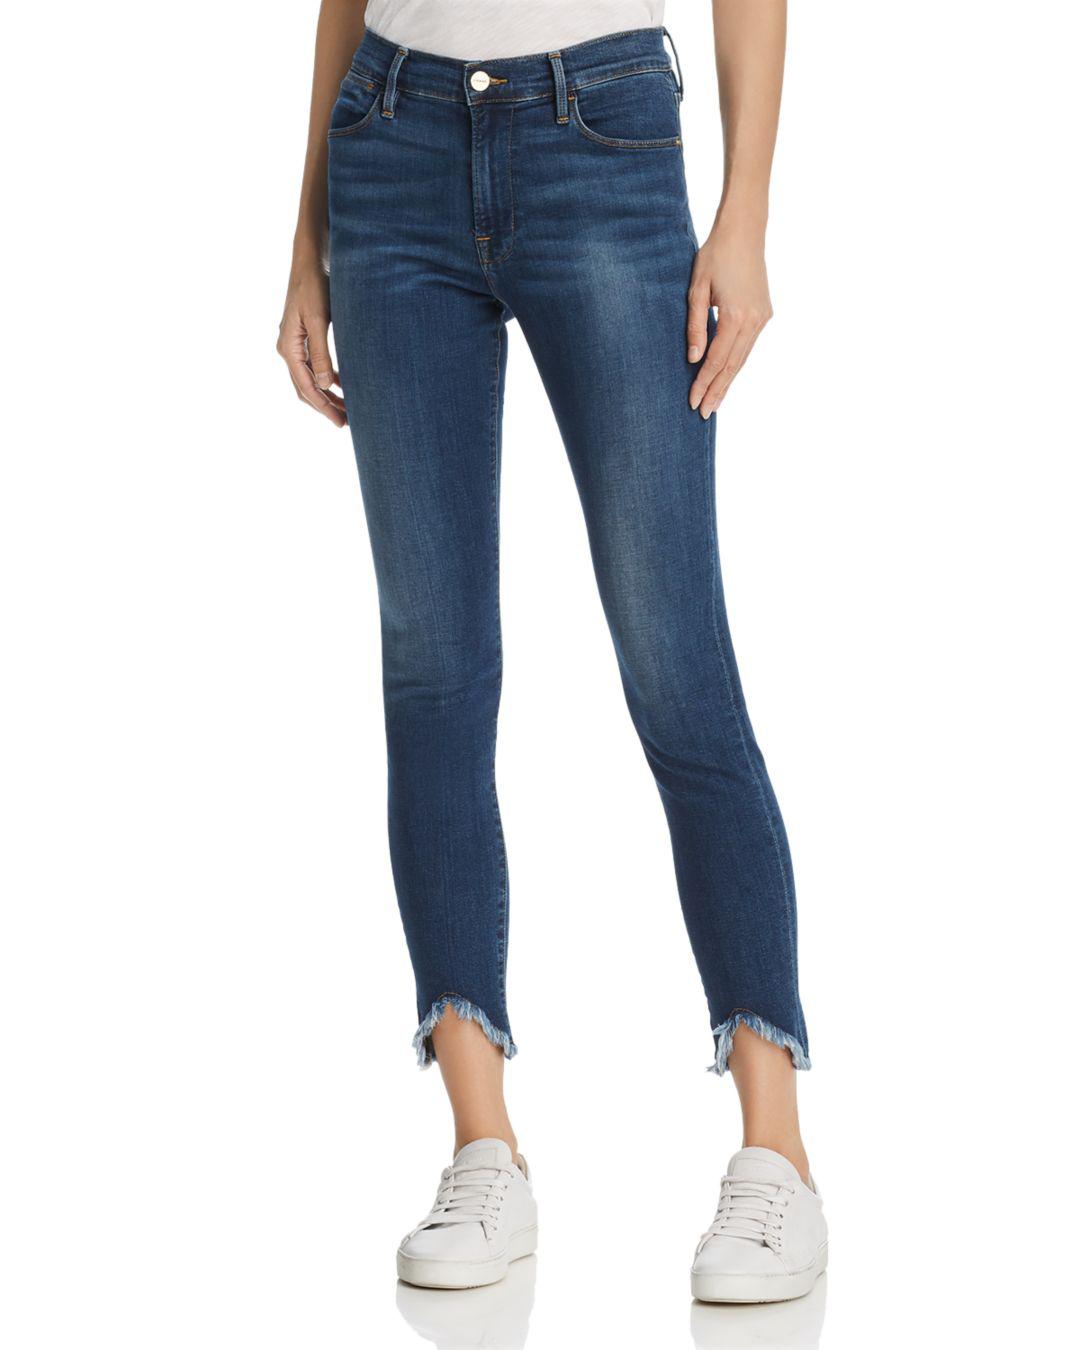 FRAME Denim Le High Skinny Triangle Hem Jeans In Sulham in Blue - Lyst